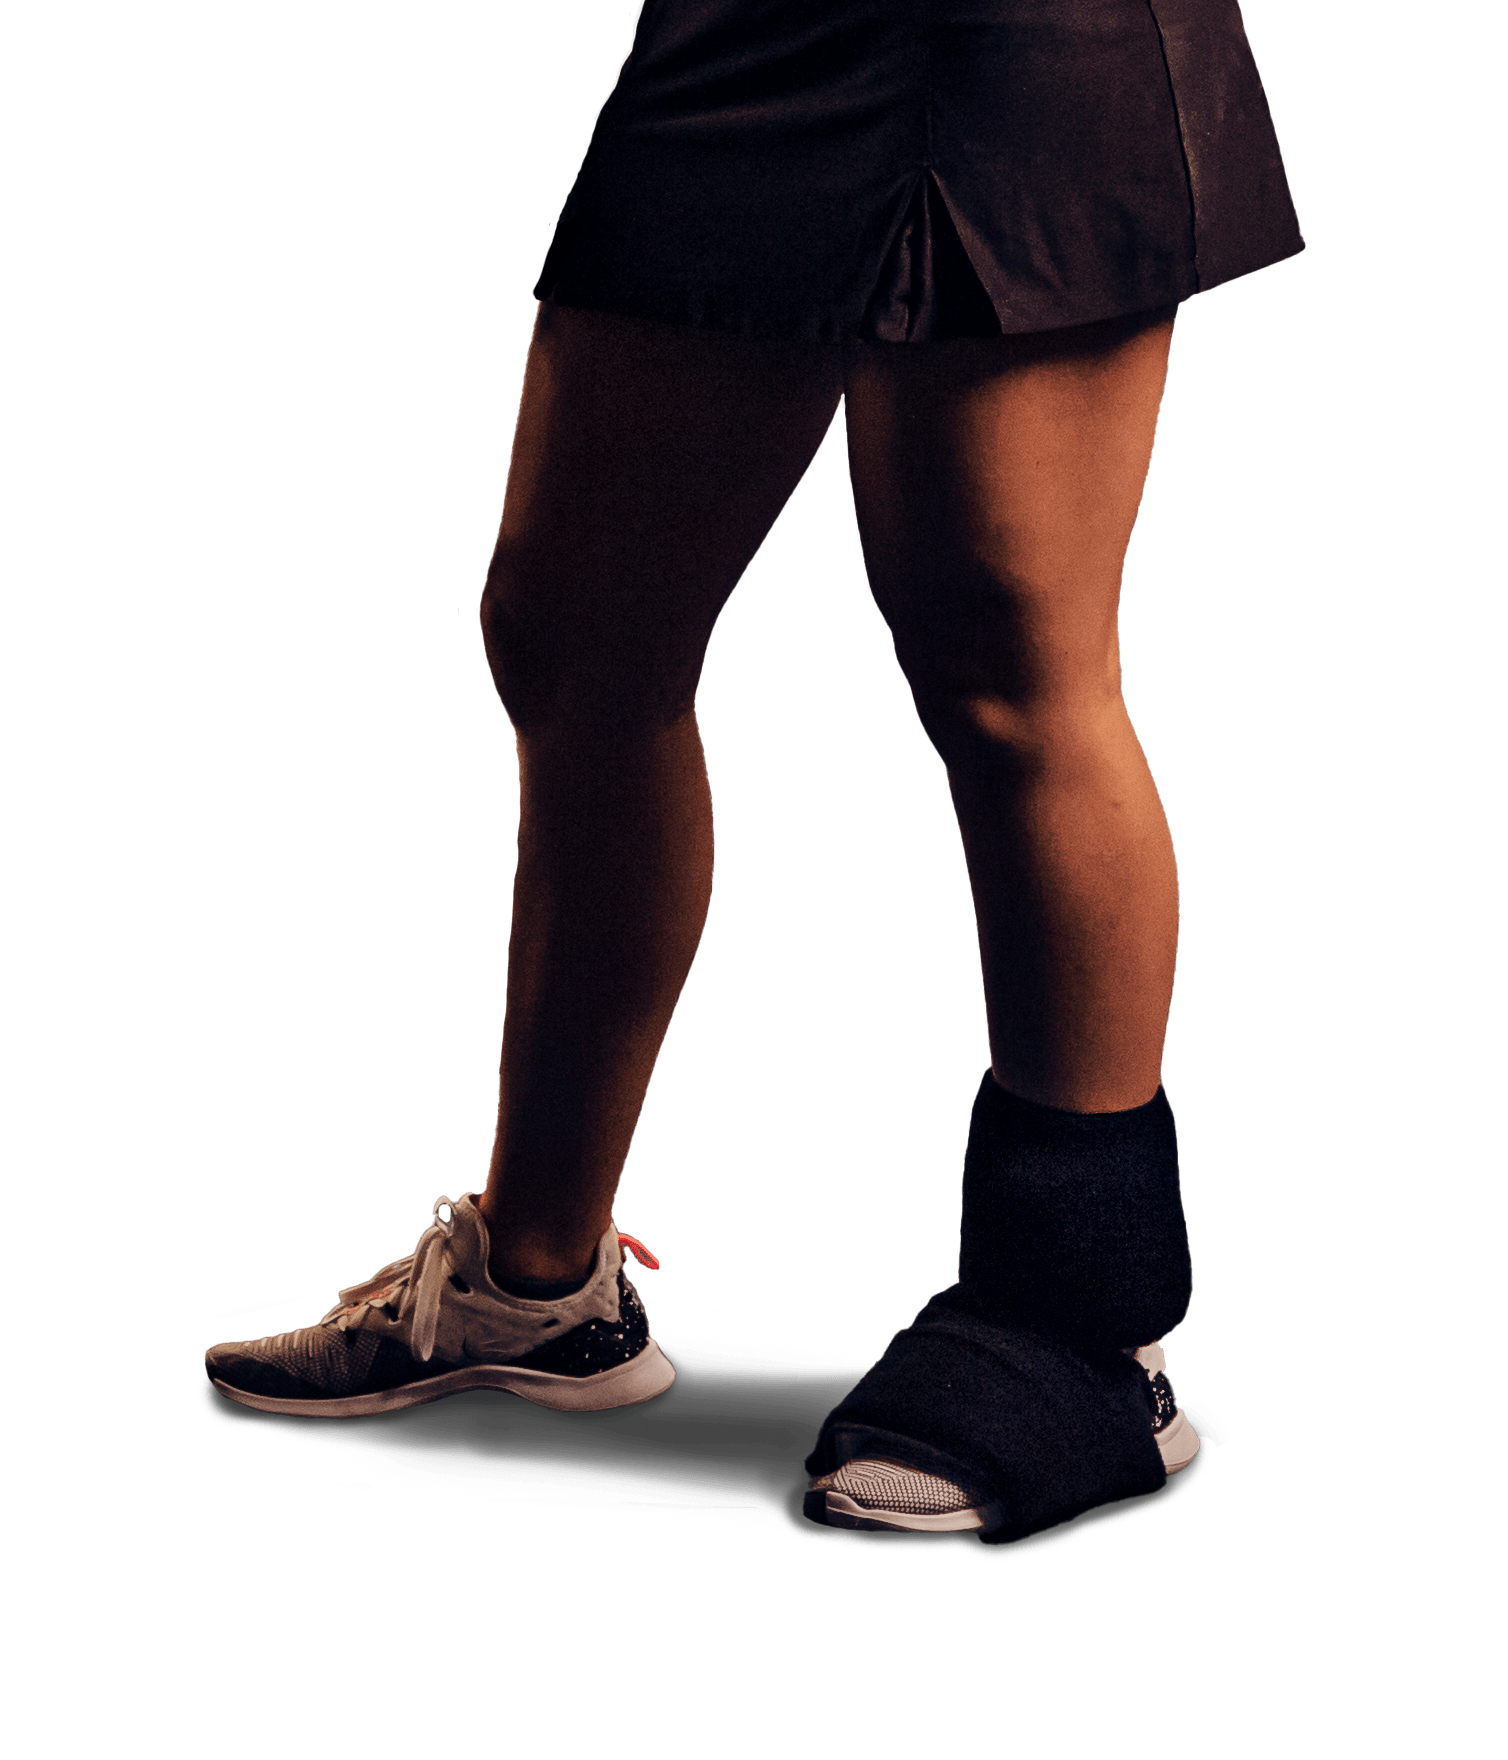 SMI Cold Compression Wraps - SMI Cold Compression Wraps - undefined by Supply Physical Therapy Compression Straps, ice wrap, SMI Cold Therapy